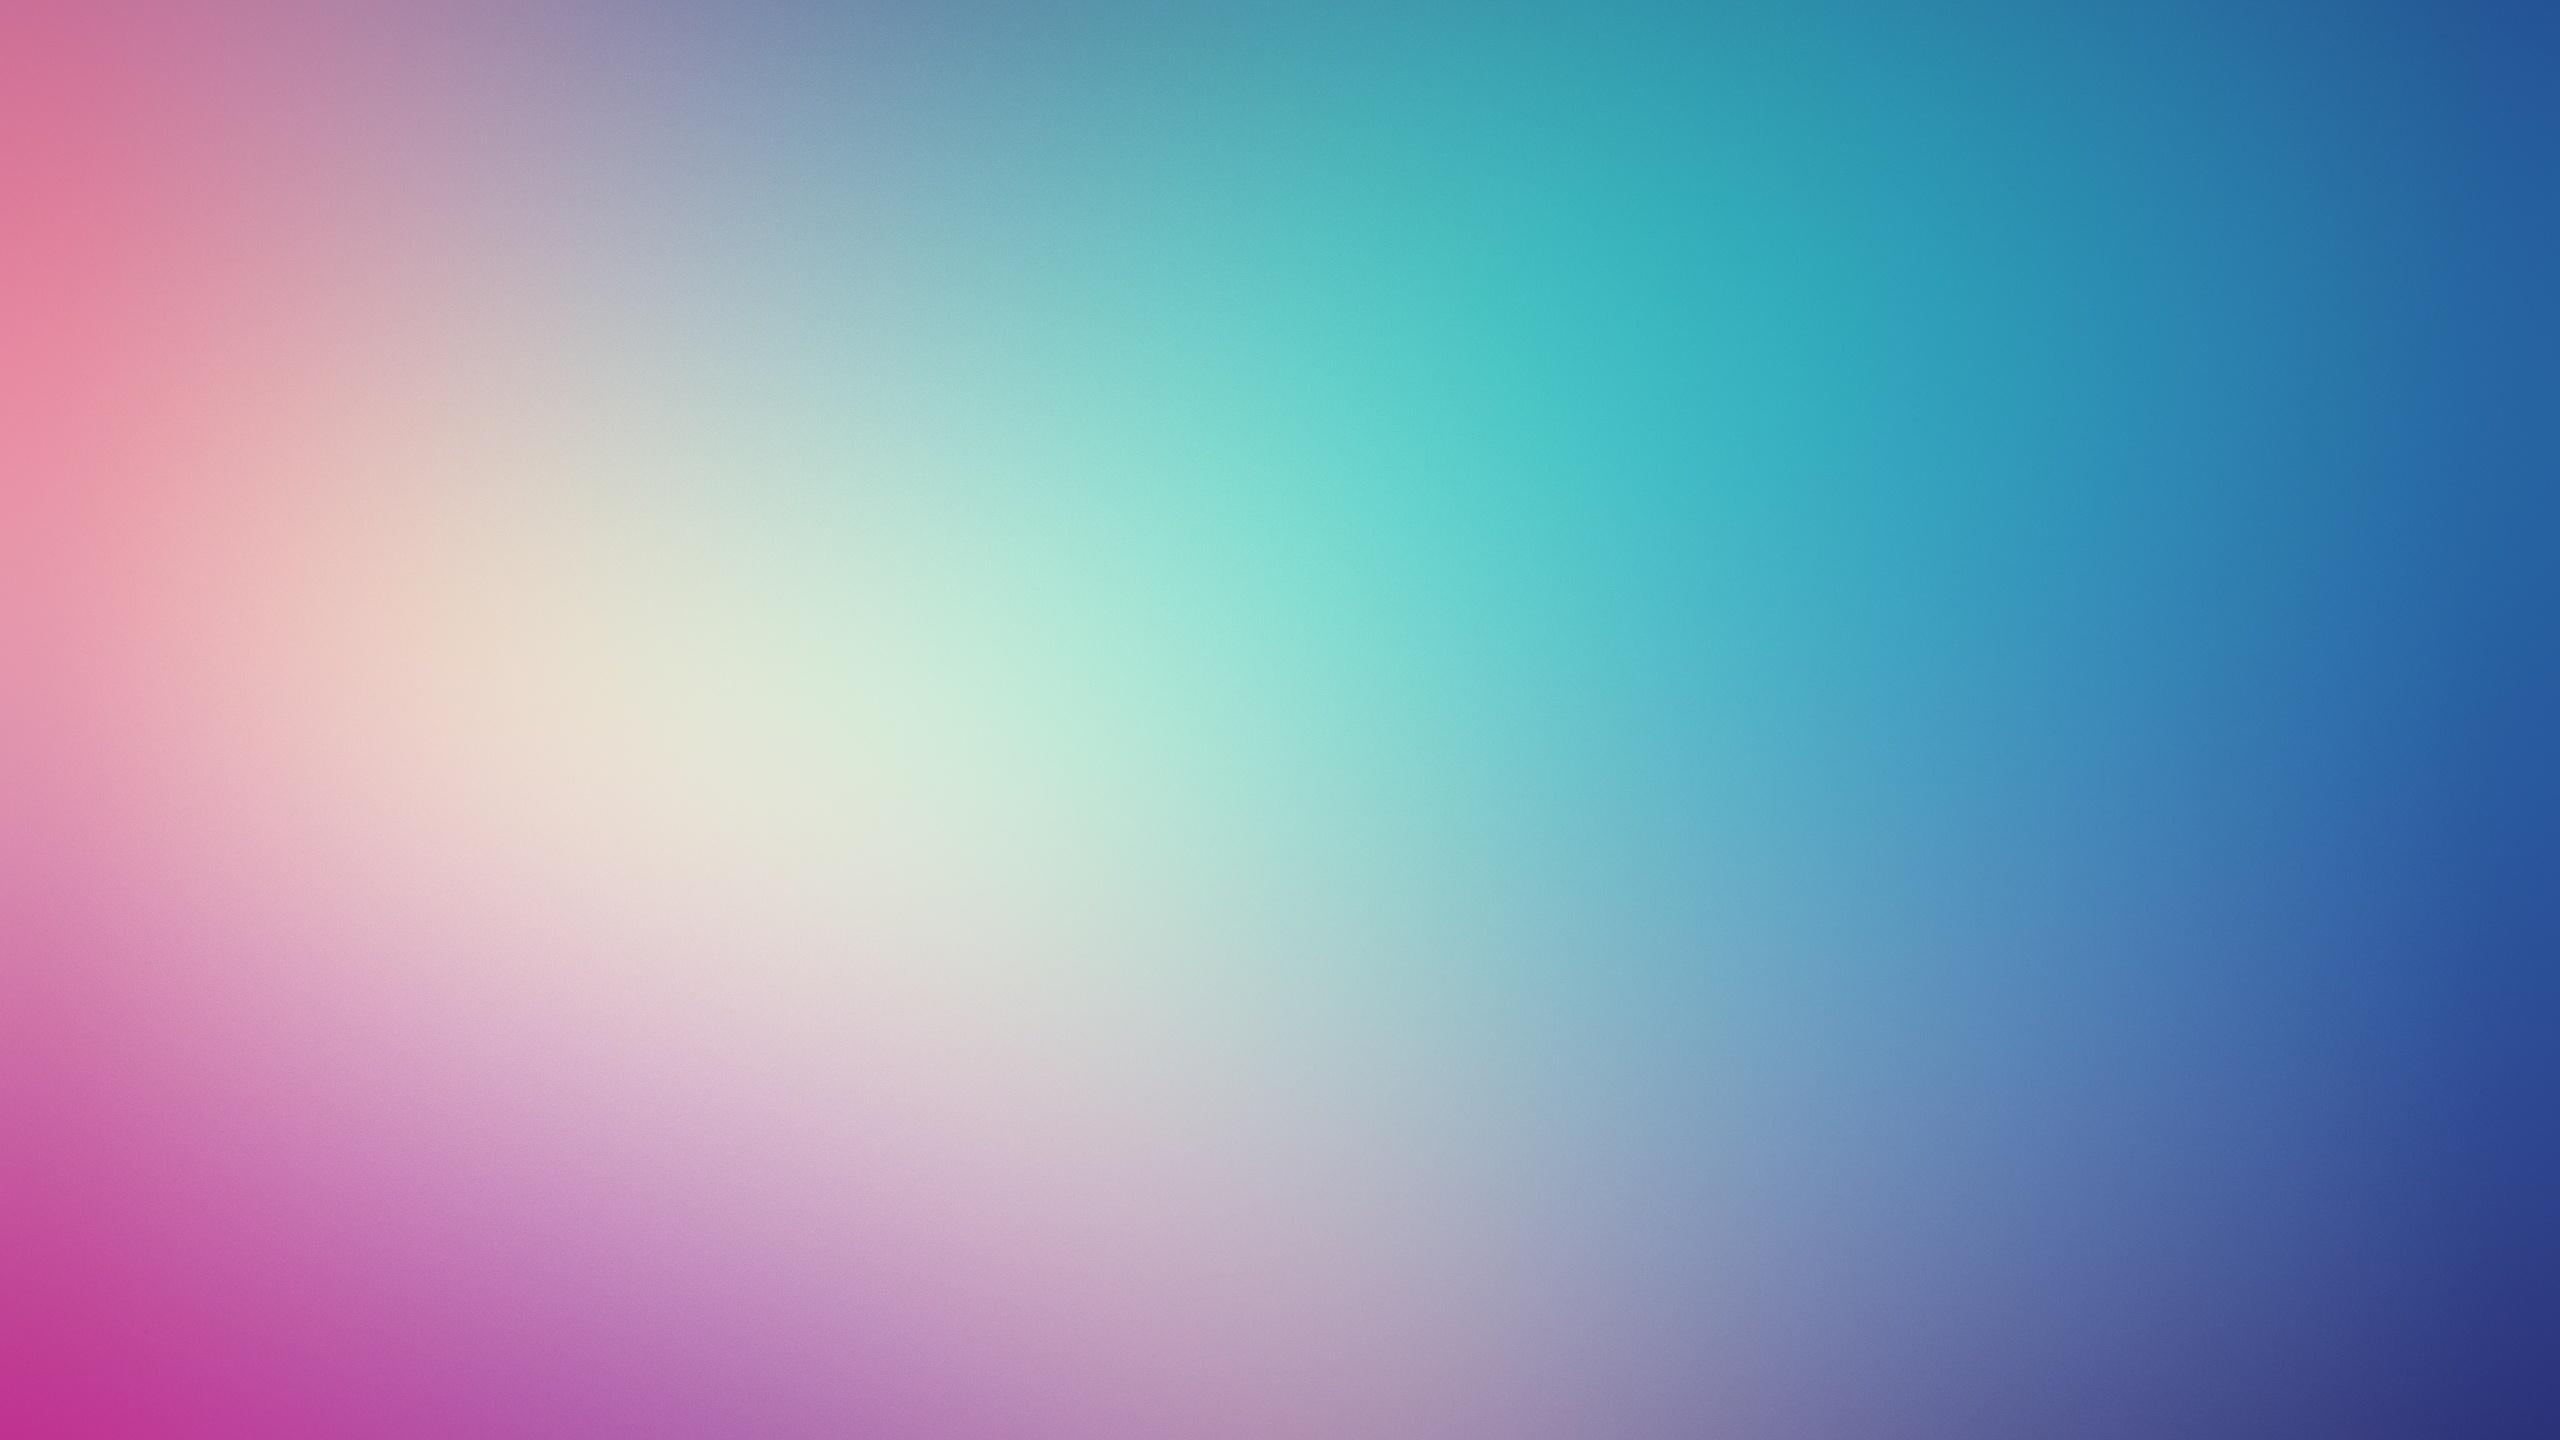 Light Blue and Purple Wallpapers - Top Free Light Blue and Purple ...